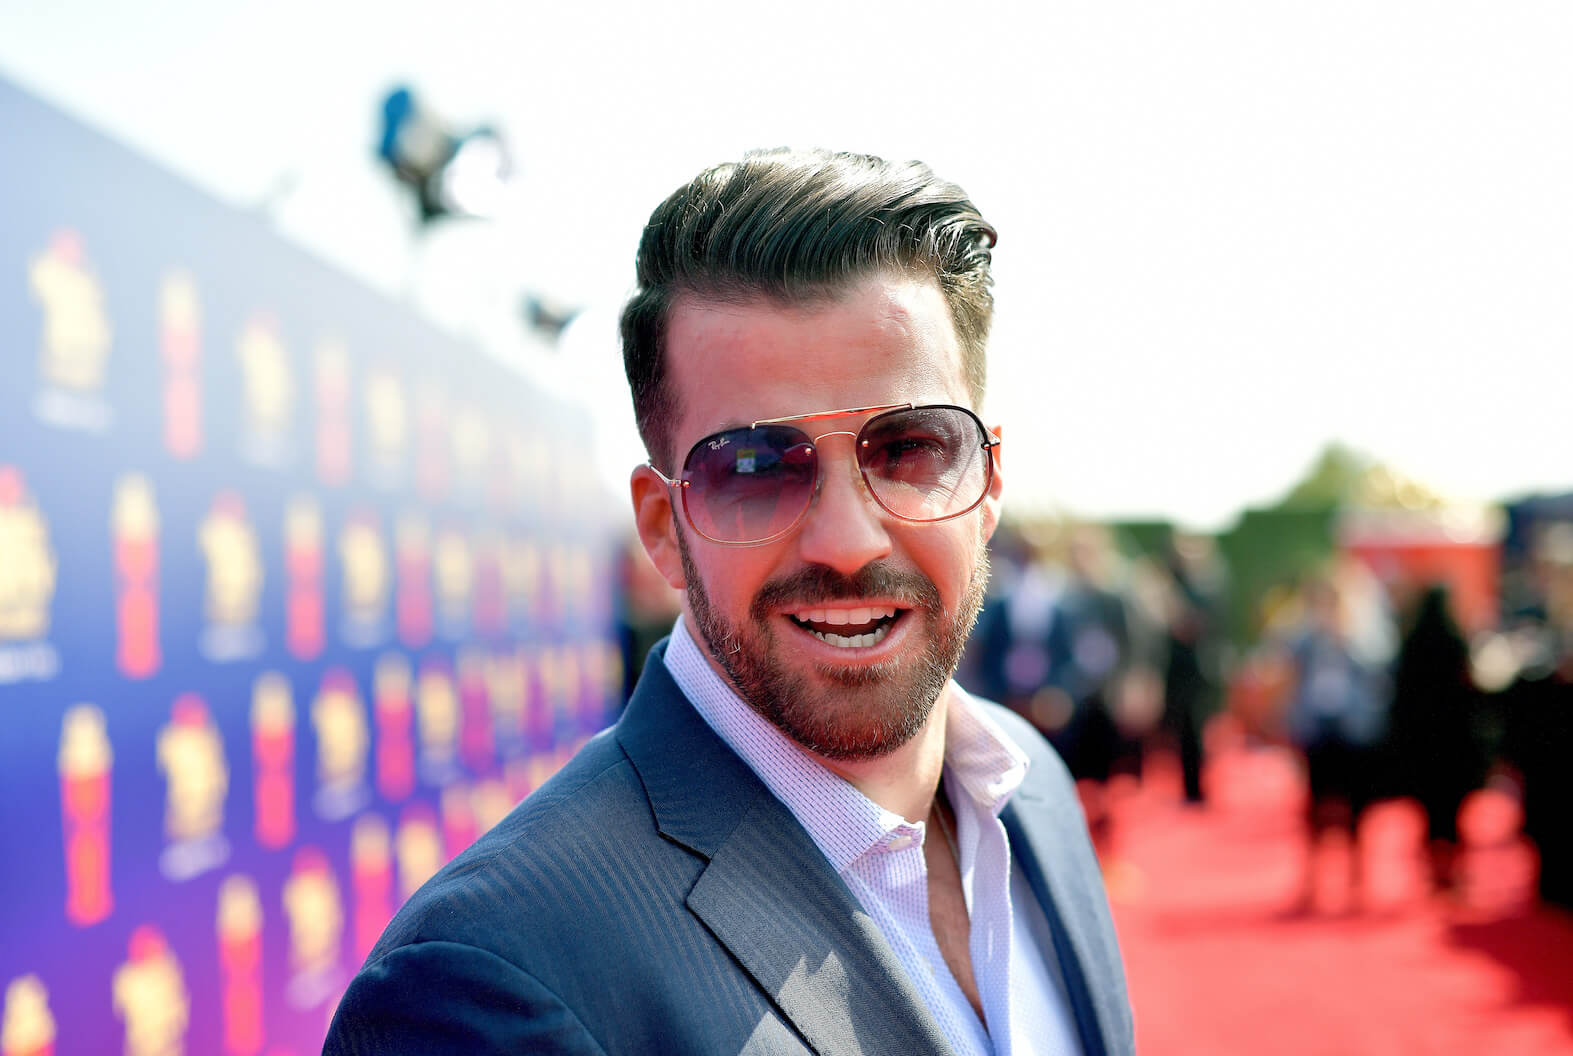 'The Challenge' star Johnny 'Bananas' Devenanzio smiling on the red carpet in a suit and sunglasses